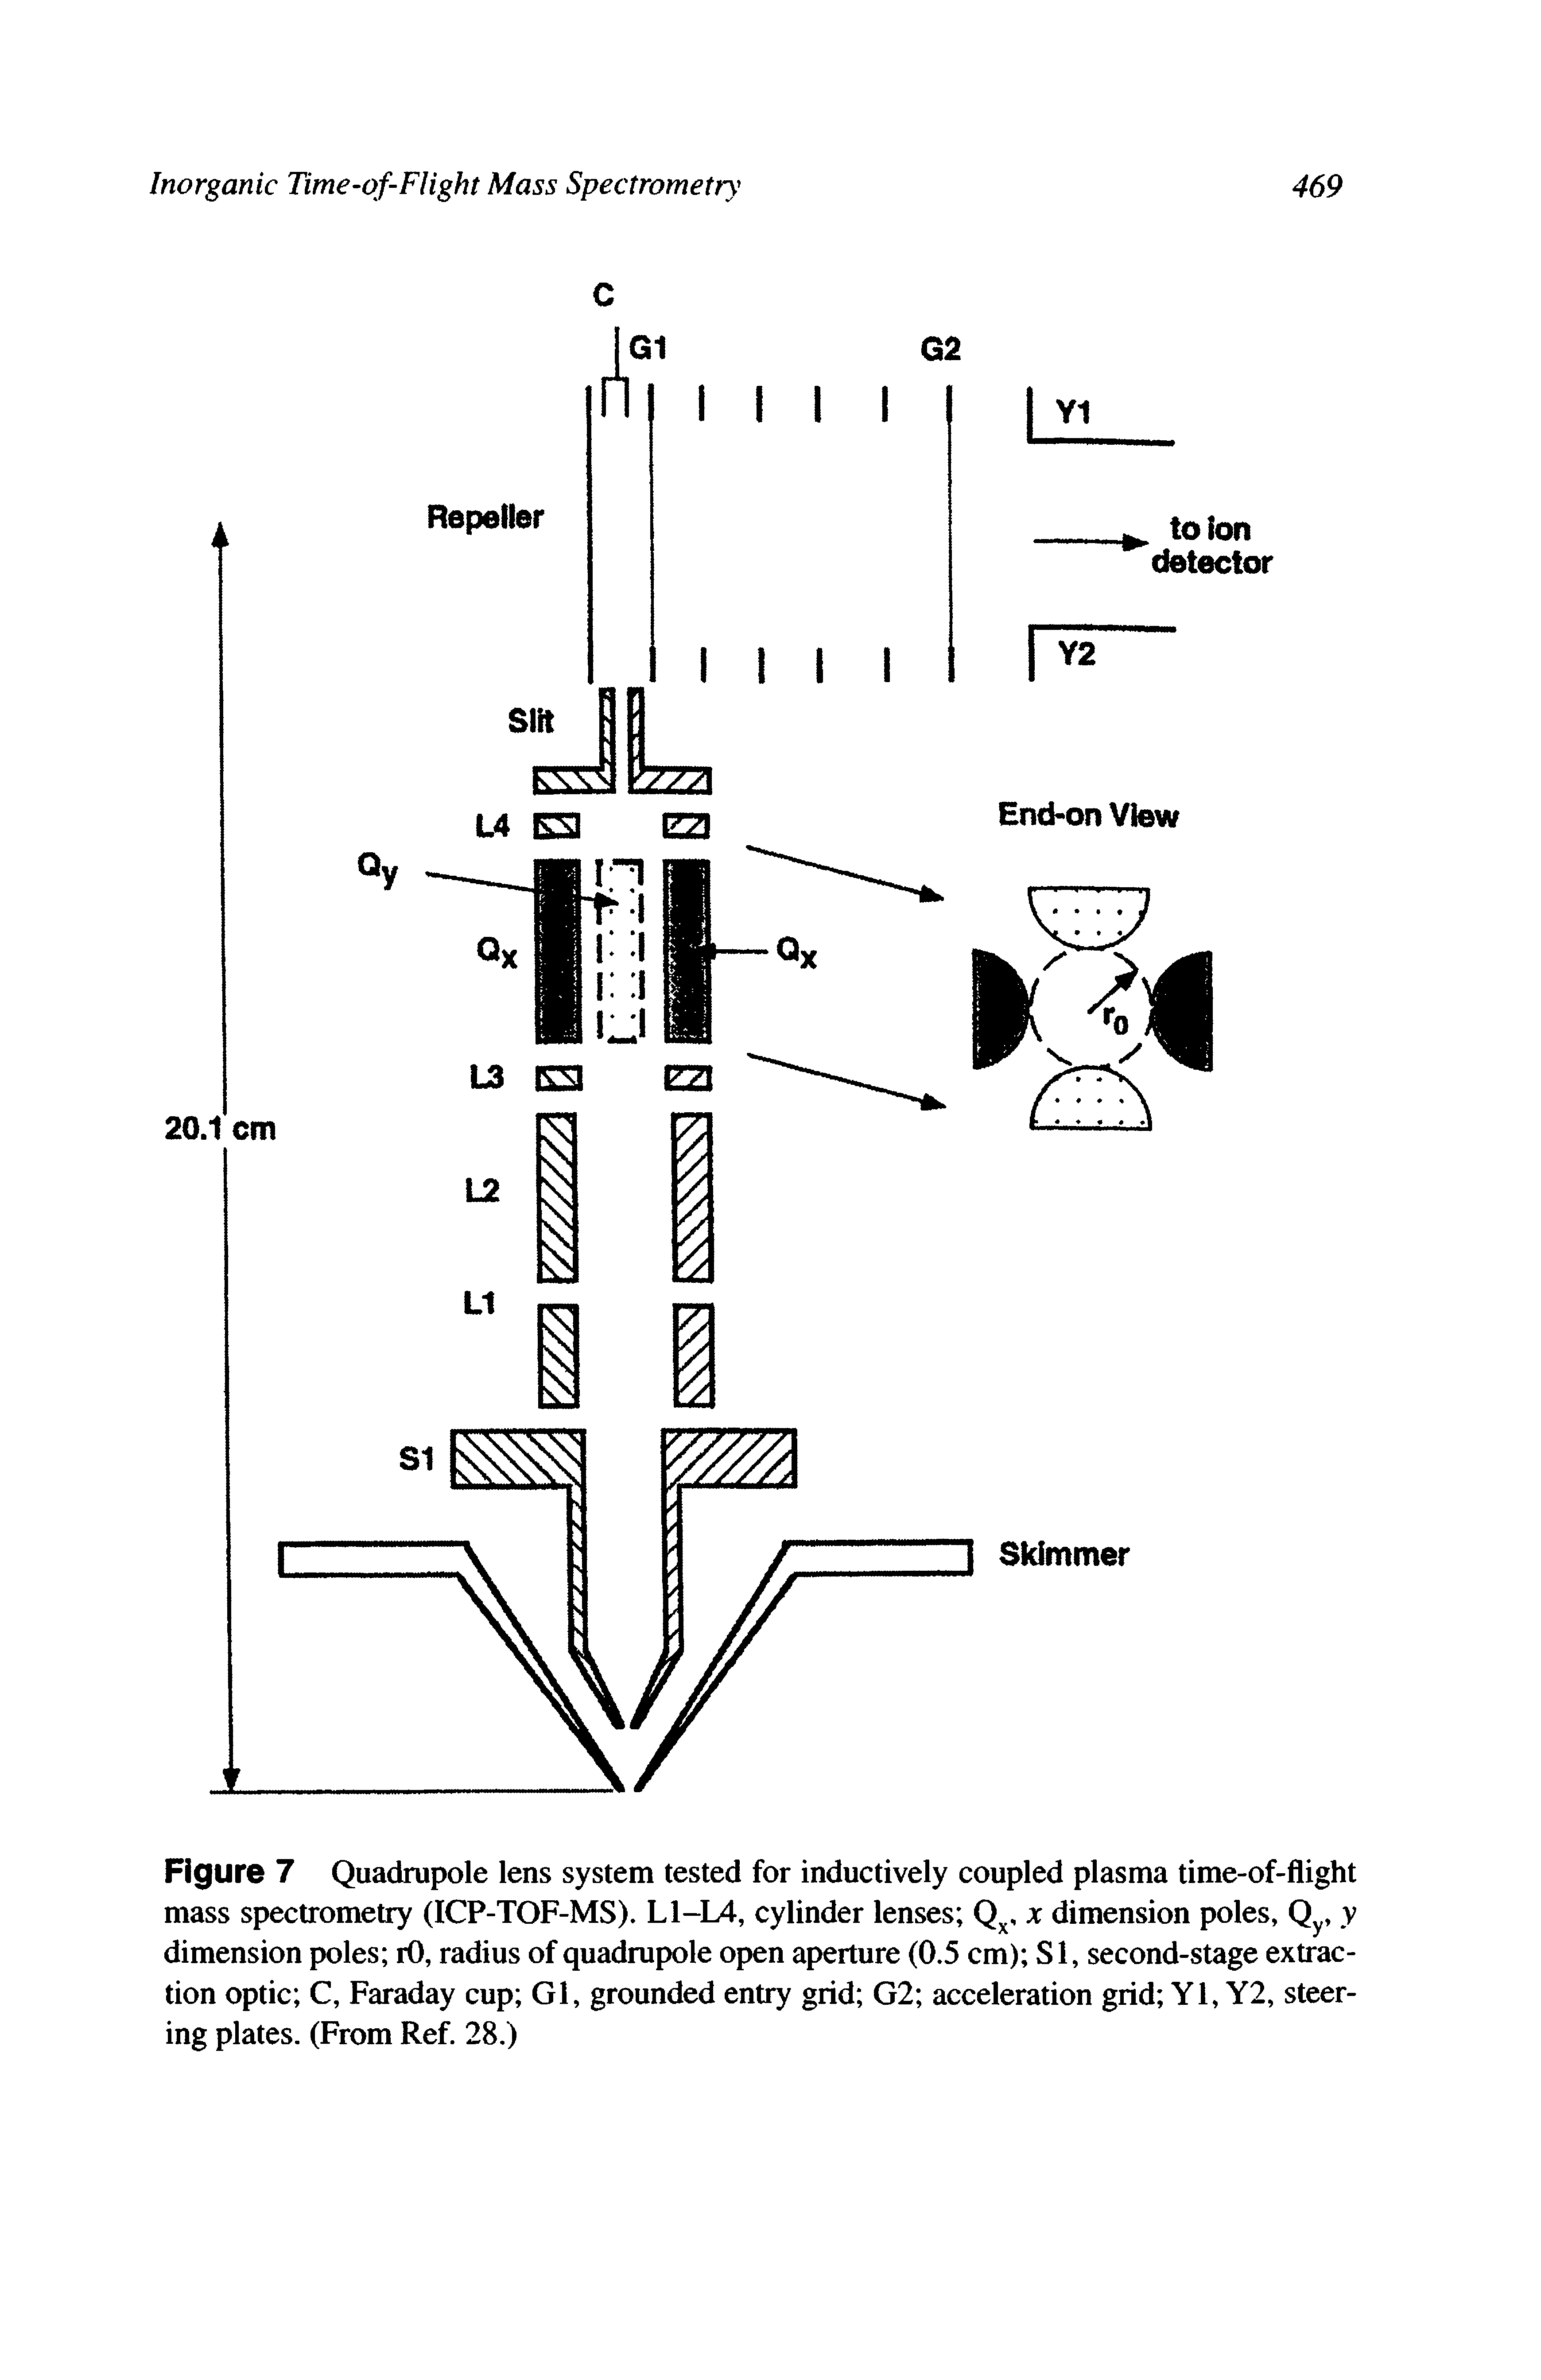 Figure 7 Quadrupole lens system tested for inductively coupled plasma time-of-flight mass spectrometry (ICP-TOF-MS). L1-L4, cylinder lenses Qx, x dimension poles, Qy, y dimension poles rO, radius of quadrupole open aperture (0.5 cm) SI, second-stage extraction optic C, Faraday cup Gl, grounded entry grid G2 acceleration grid Yl, Y2, steering plates. (From Ref. 28.)...